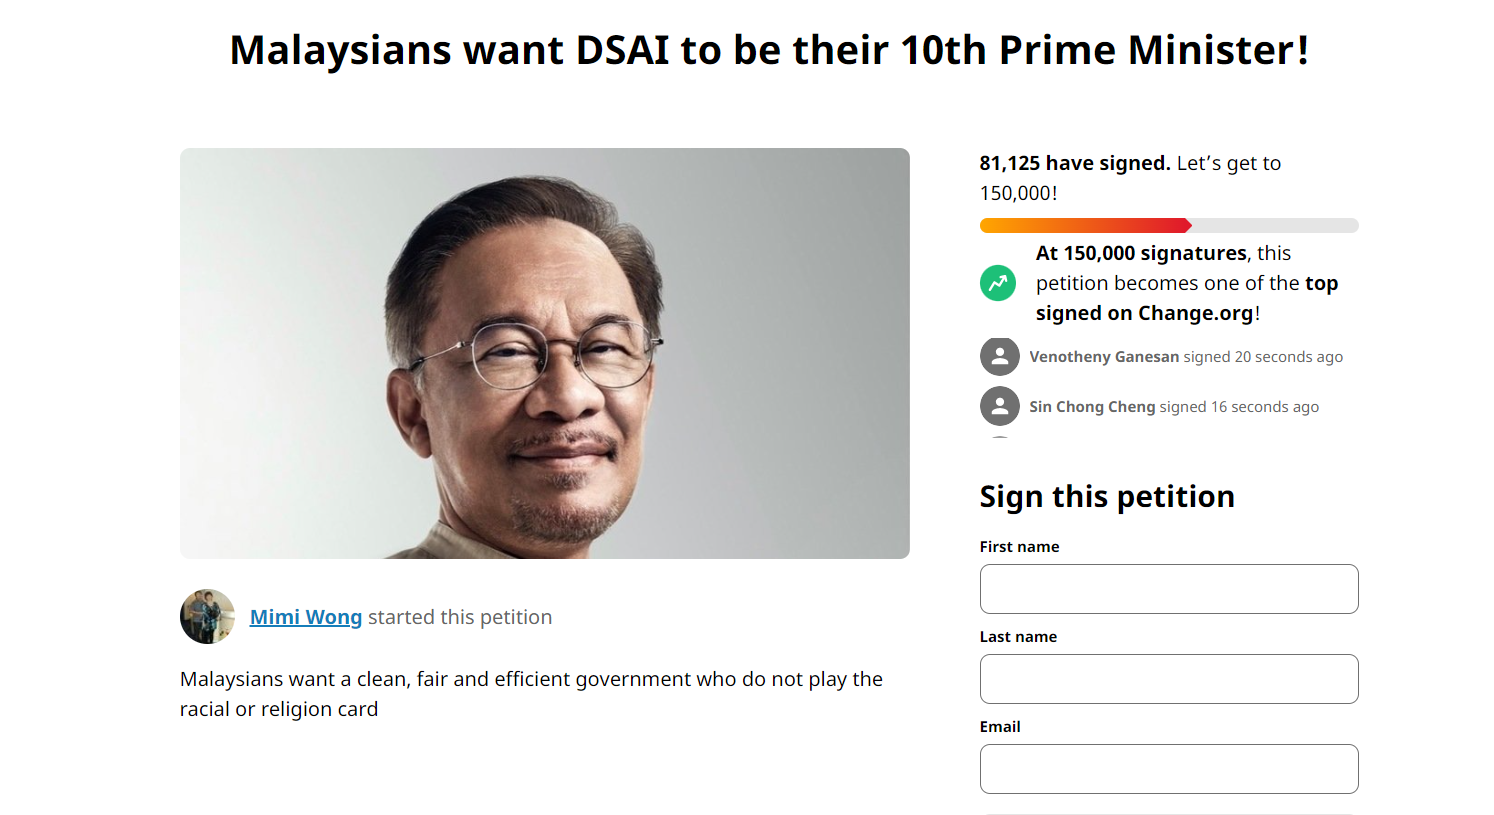 Petition for anwar to be pm